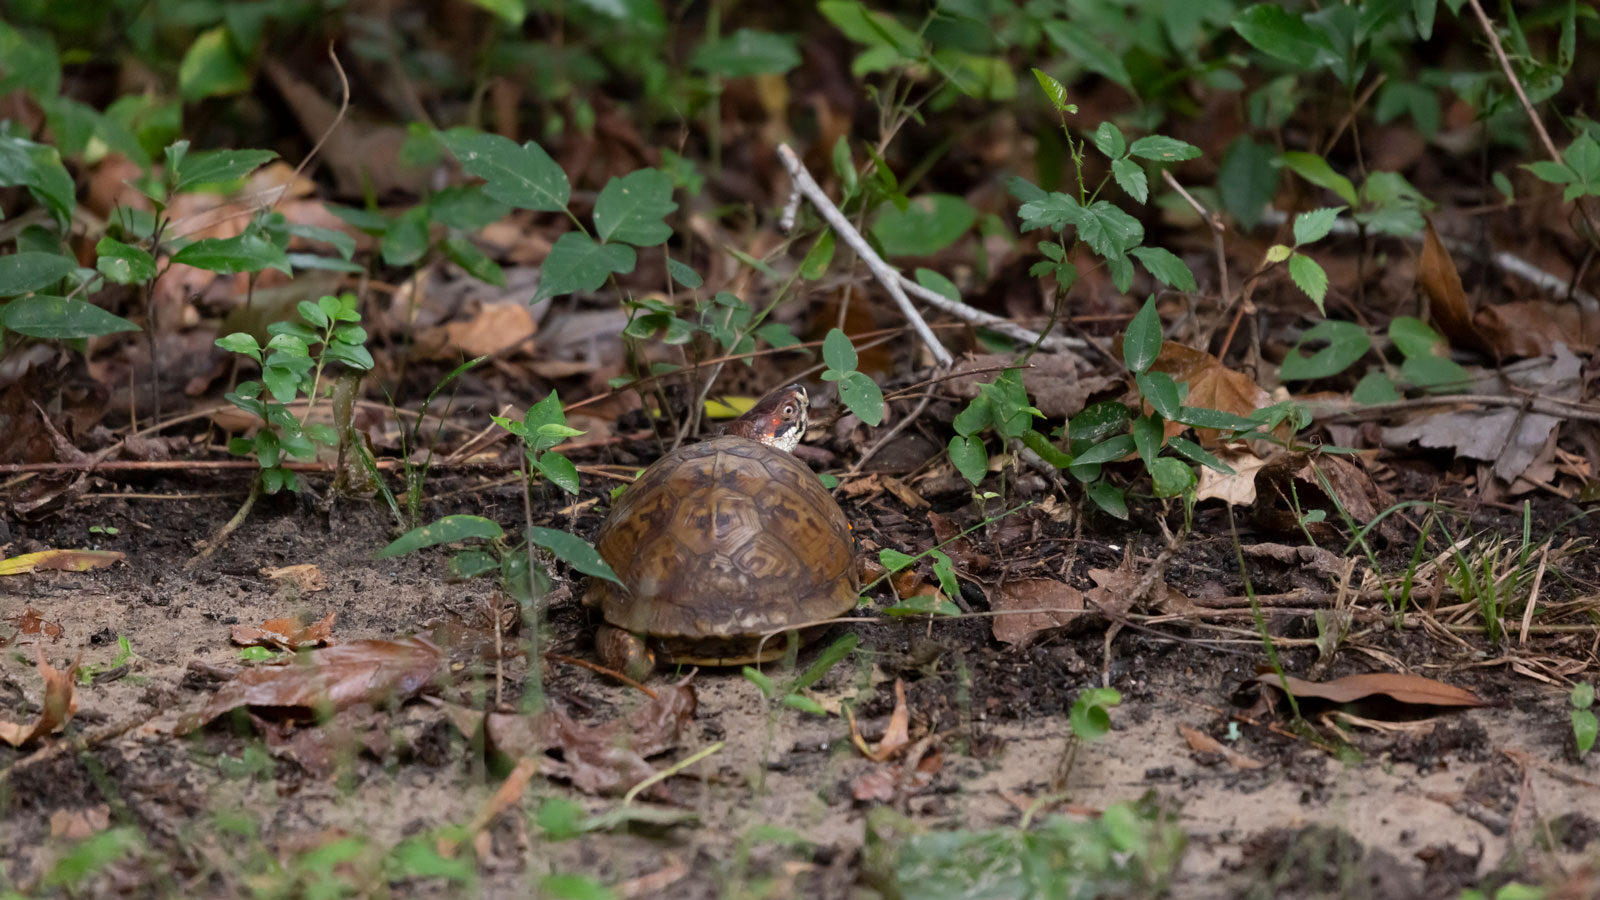 Eastern box turtle foraging on the ground